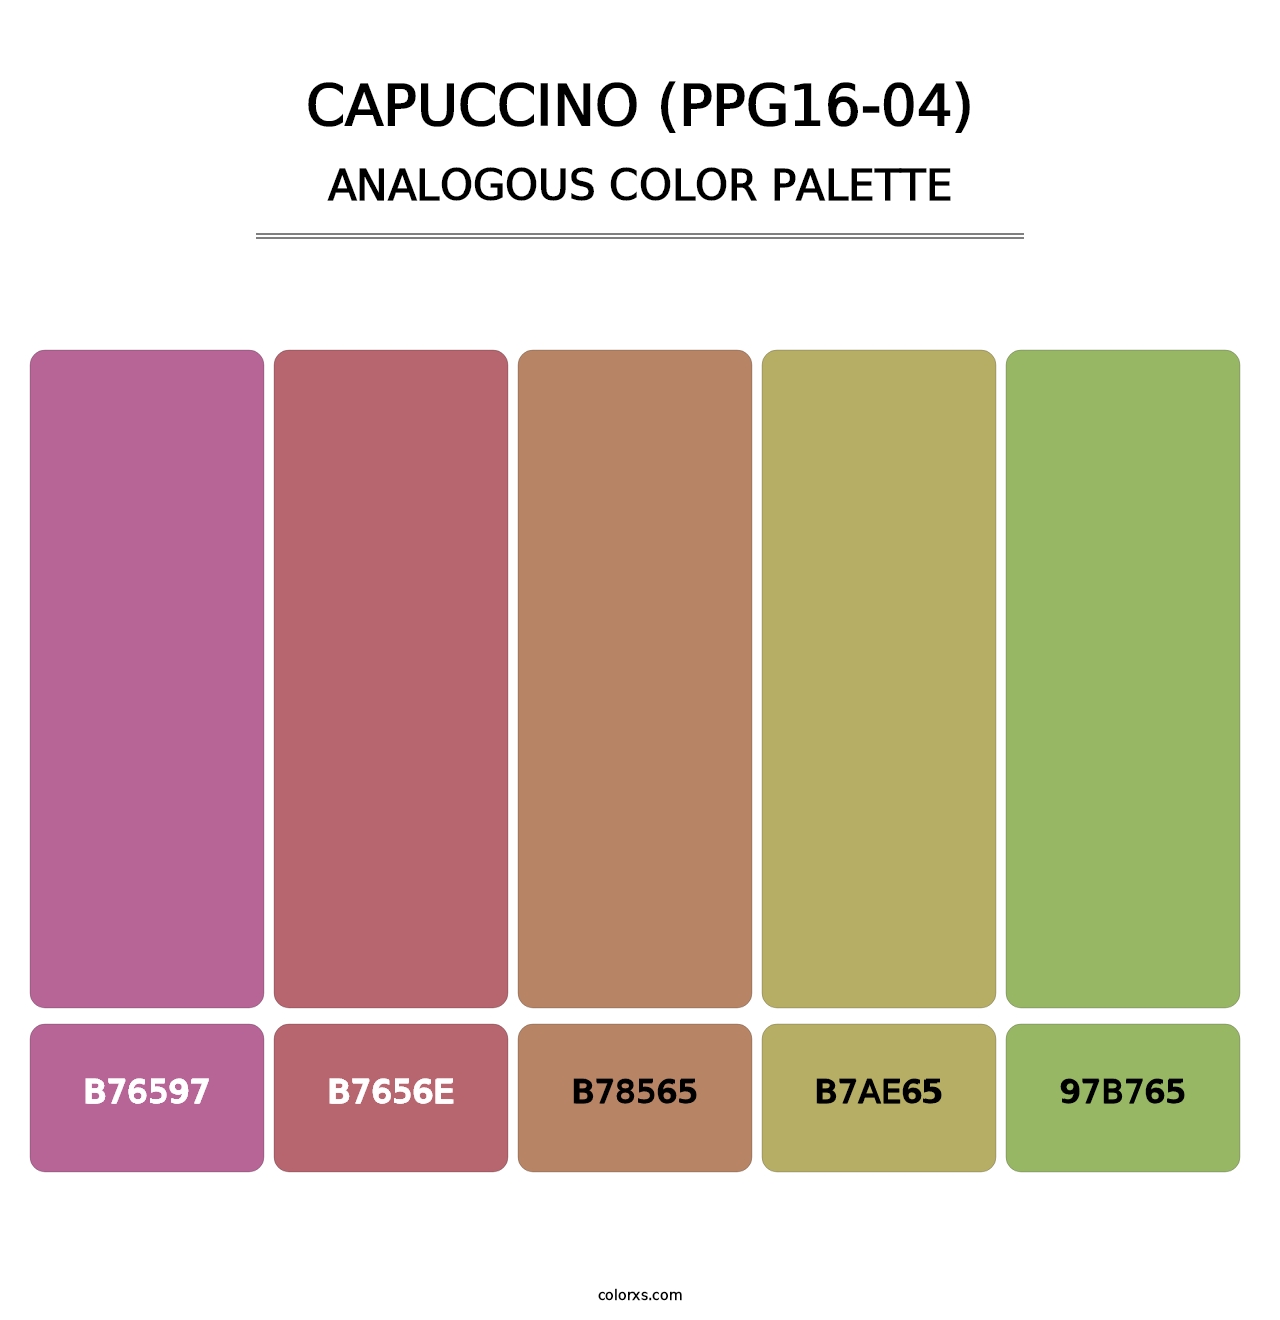 Capuccino (PPG16-04) - Analogous Color Palette